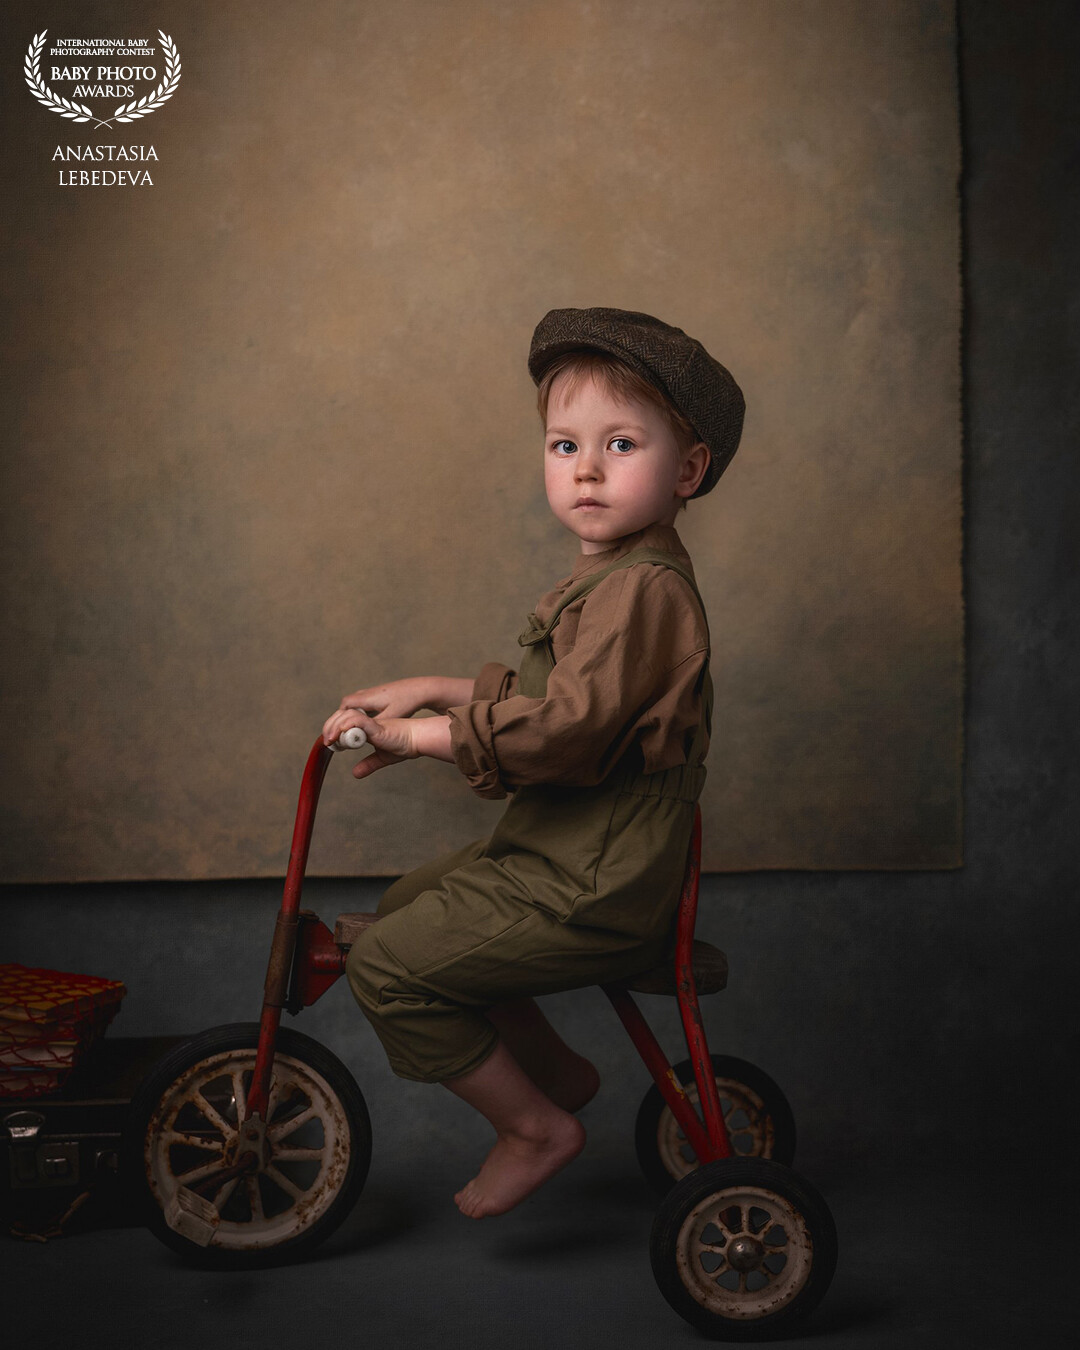 I wanted to embody the idea and make a photo shoot in retro style. I bought a children's bike at a flea market and invited my friend's son to my studio......and....that's what a beautiful retro picture we got.